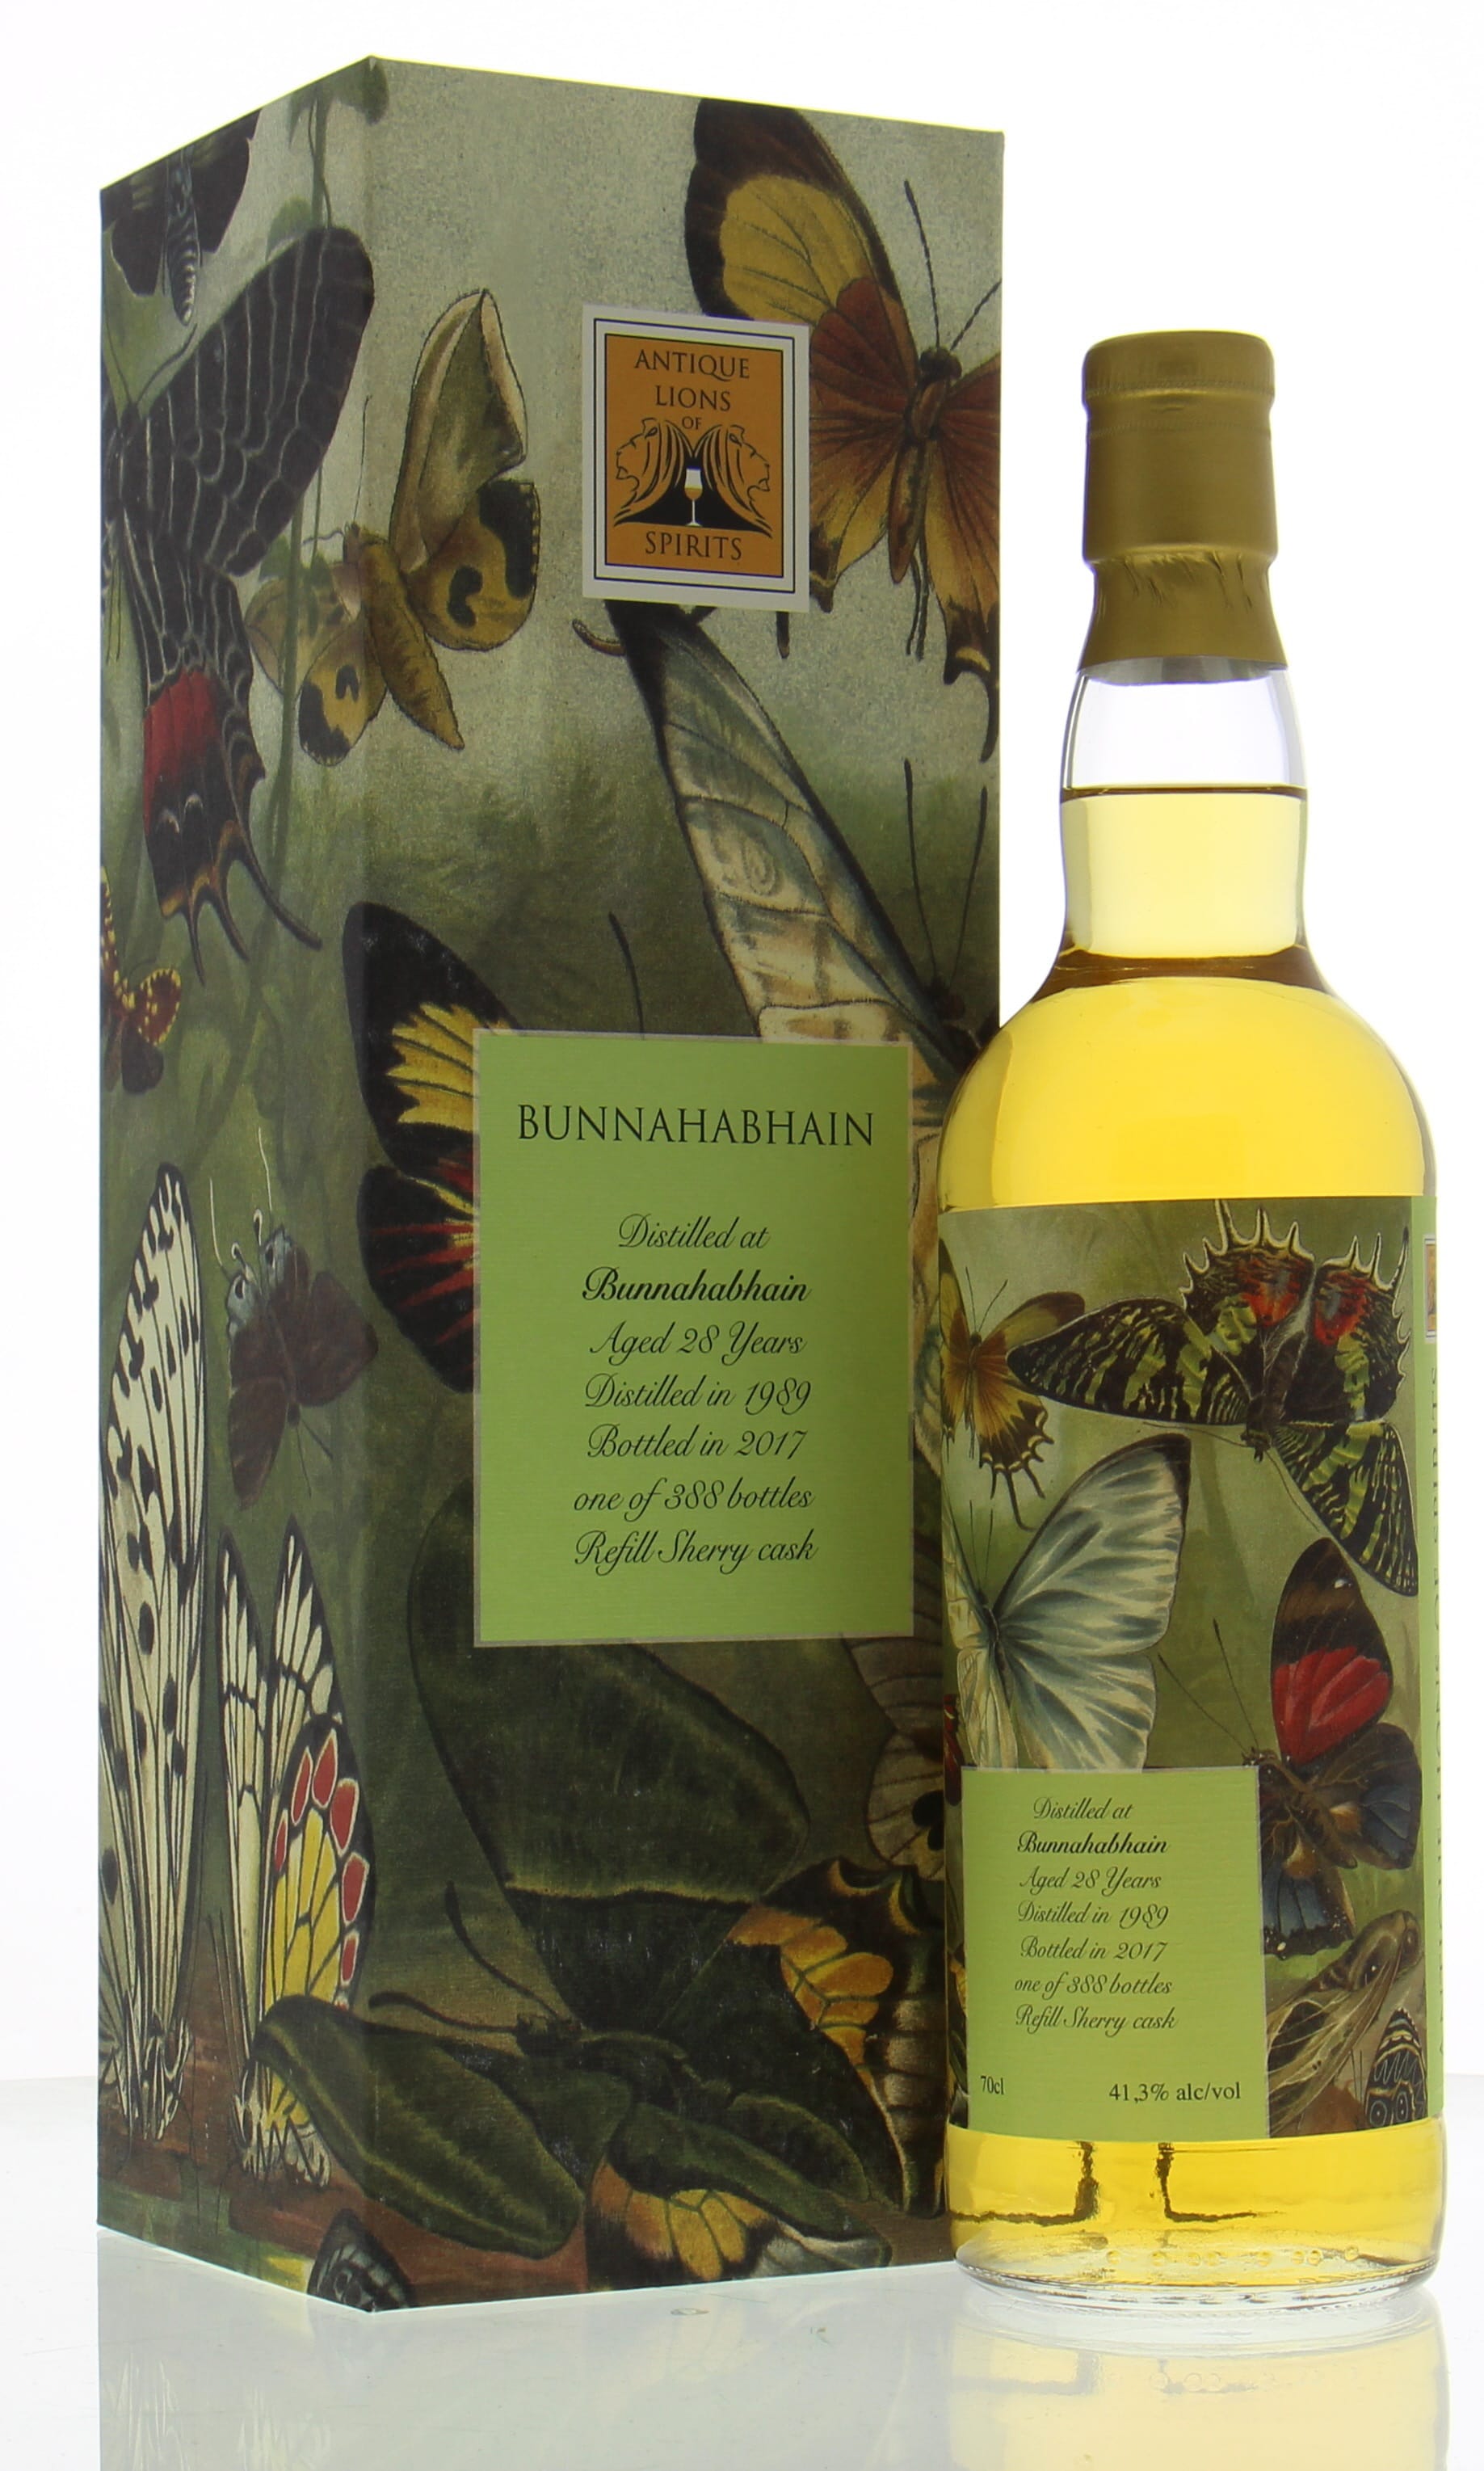 Bunnahabhain - 28 Years Old Antique Lions of Spirits The Butterflies 41.3% 1989 In Original Container